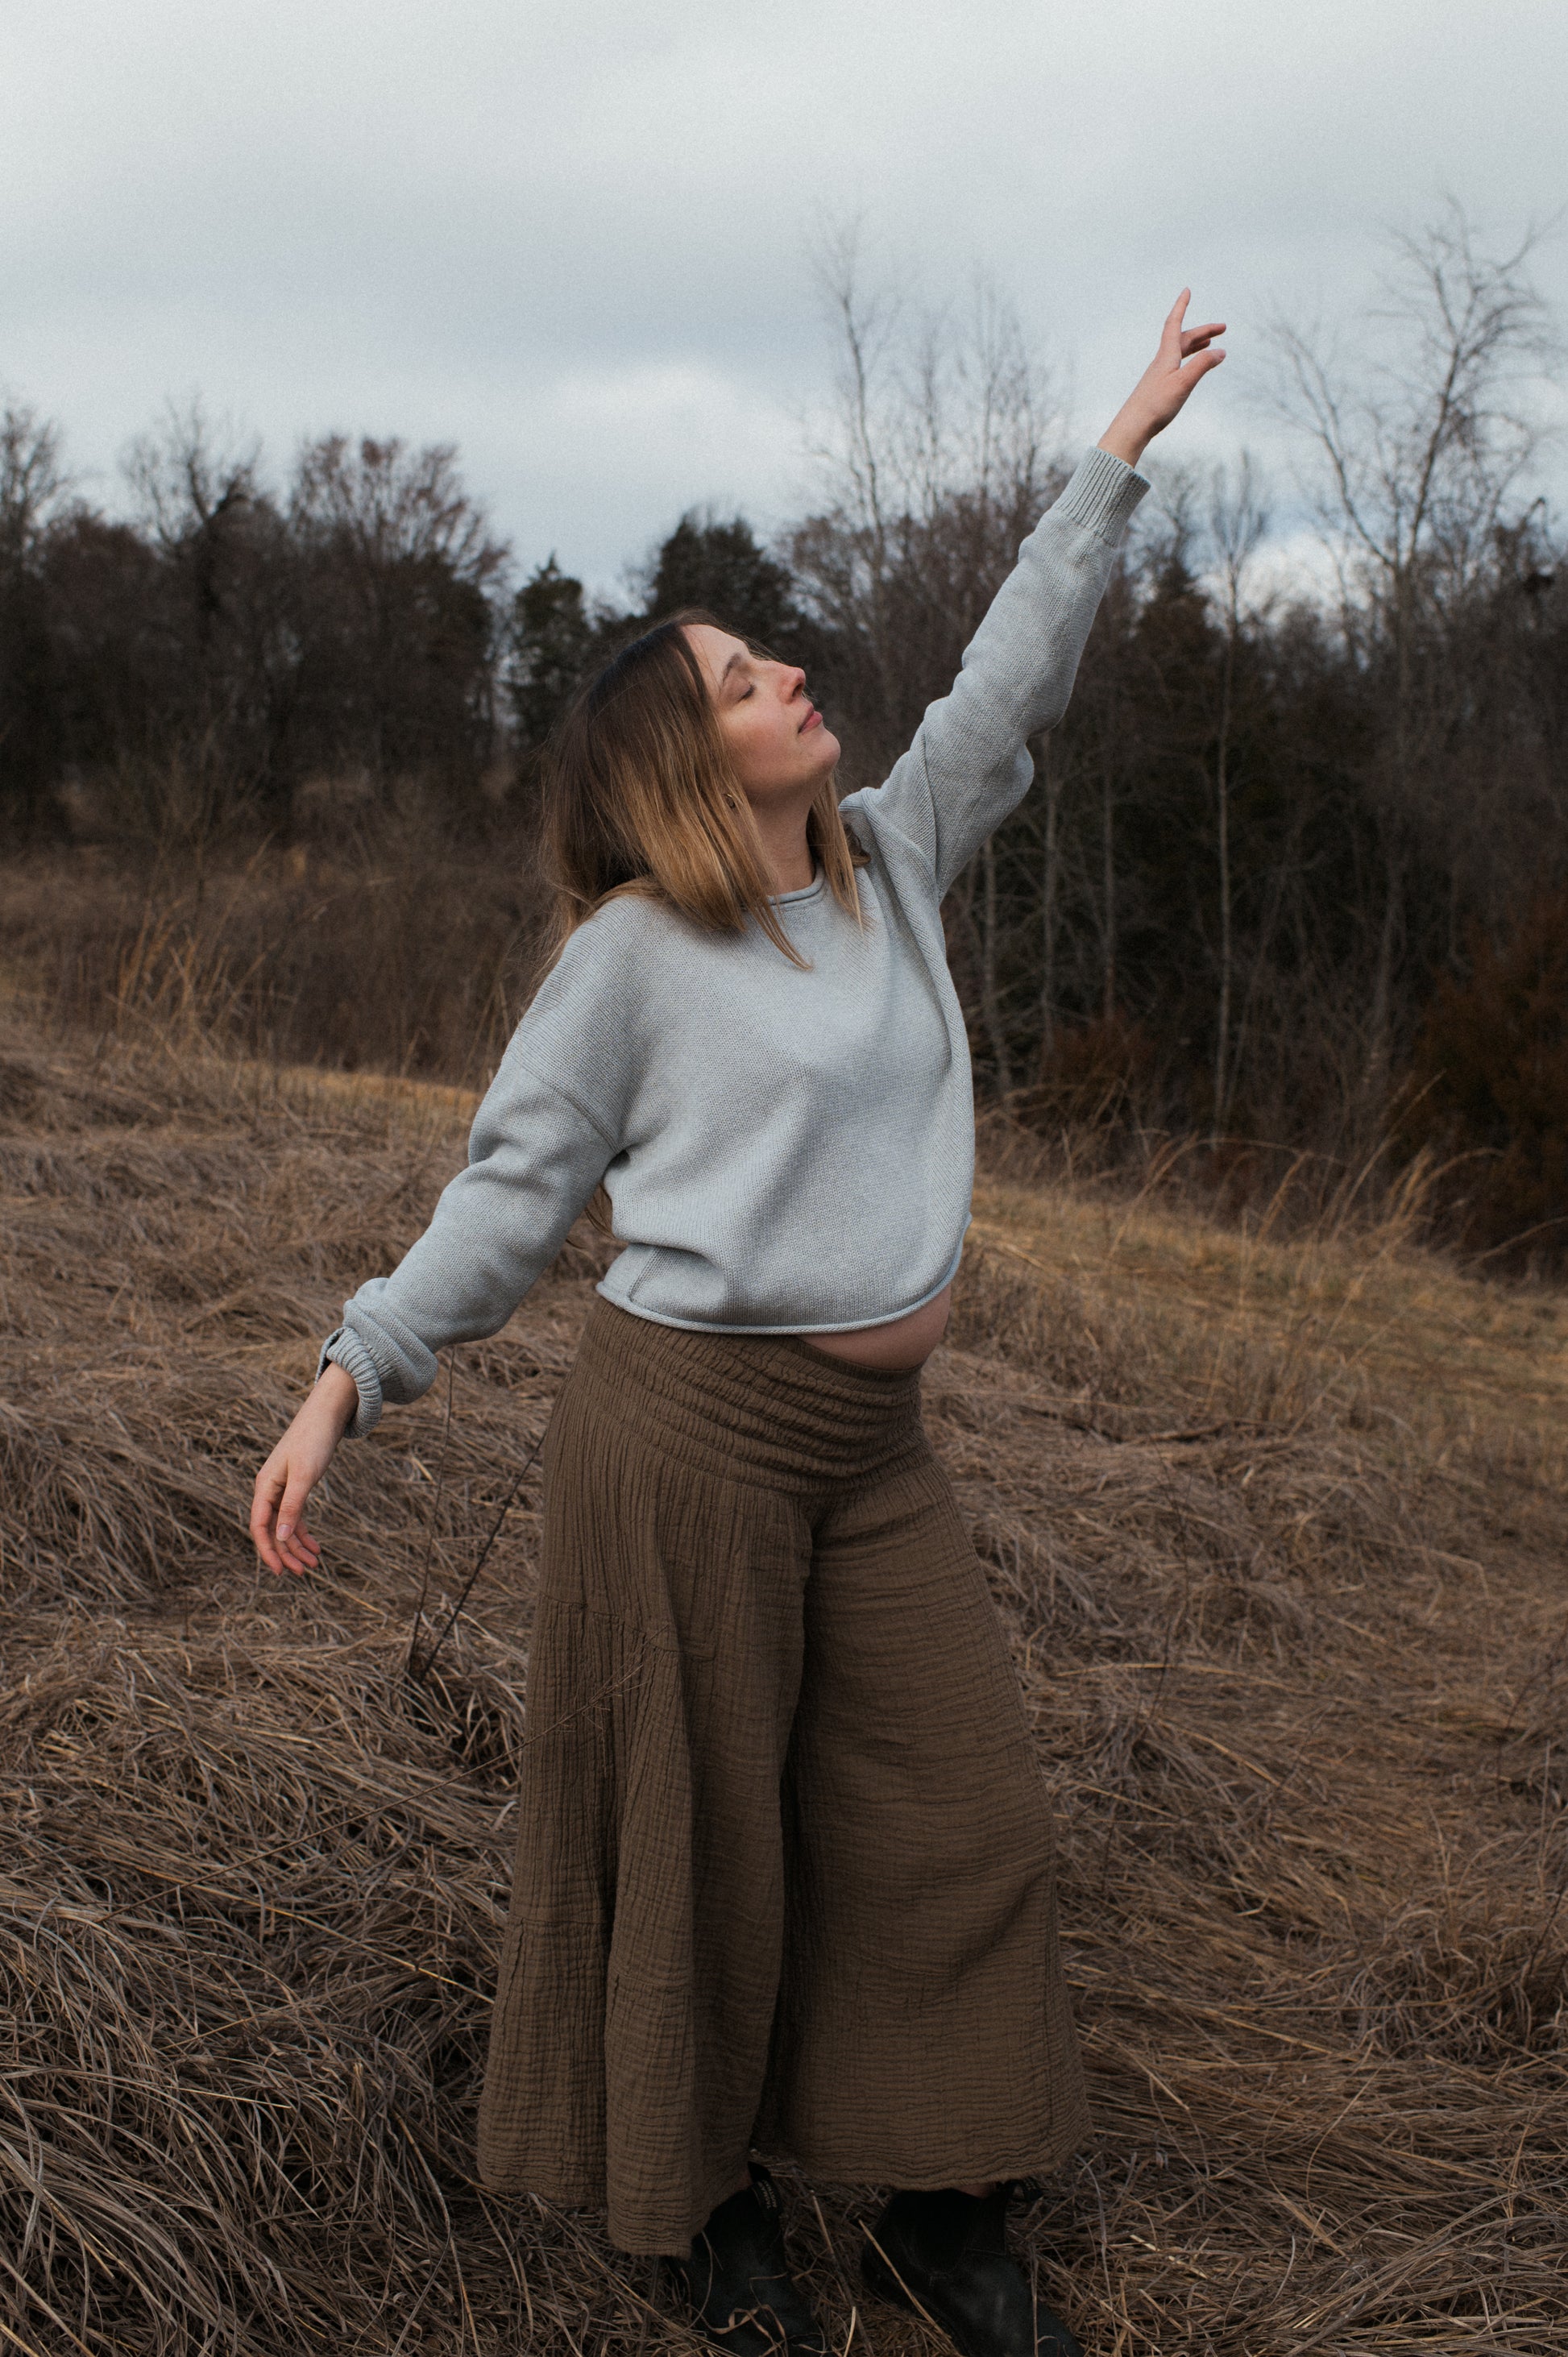 Model pointing to the sky wearing grey true knit cotton sweater.